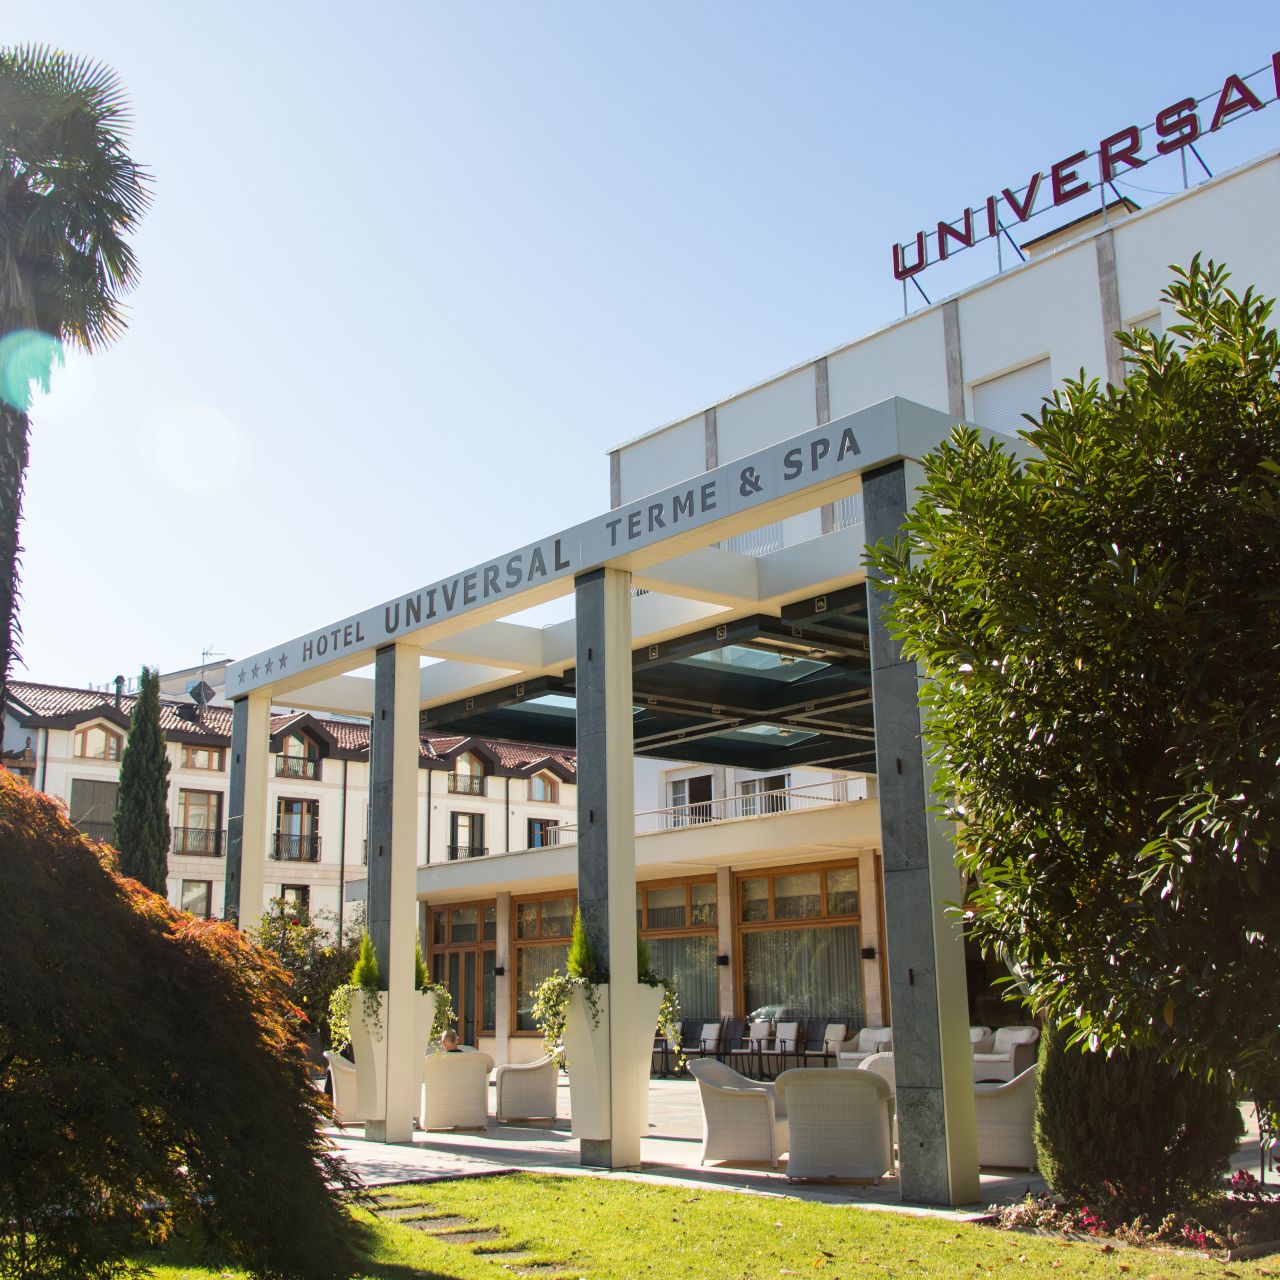 Hotel Universal Terme - Abano Terme - Great prices at HOTEL INFO